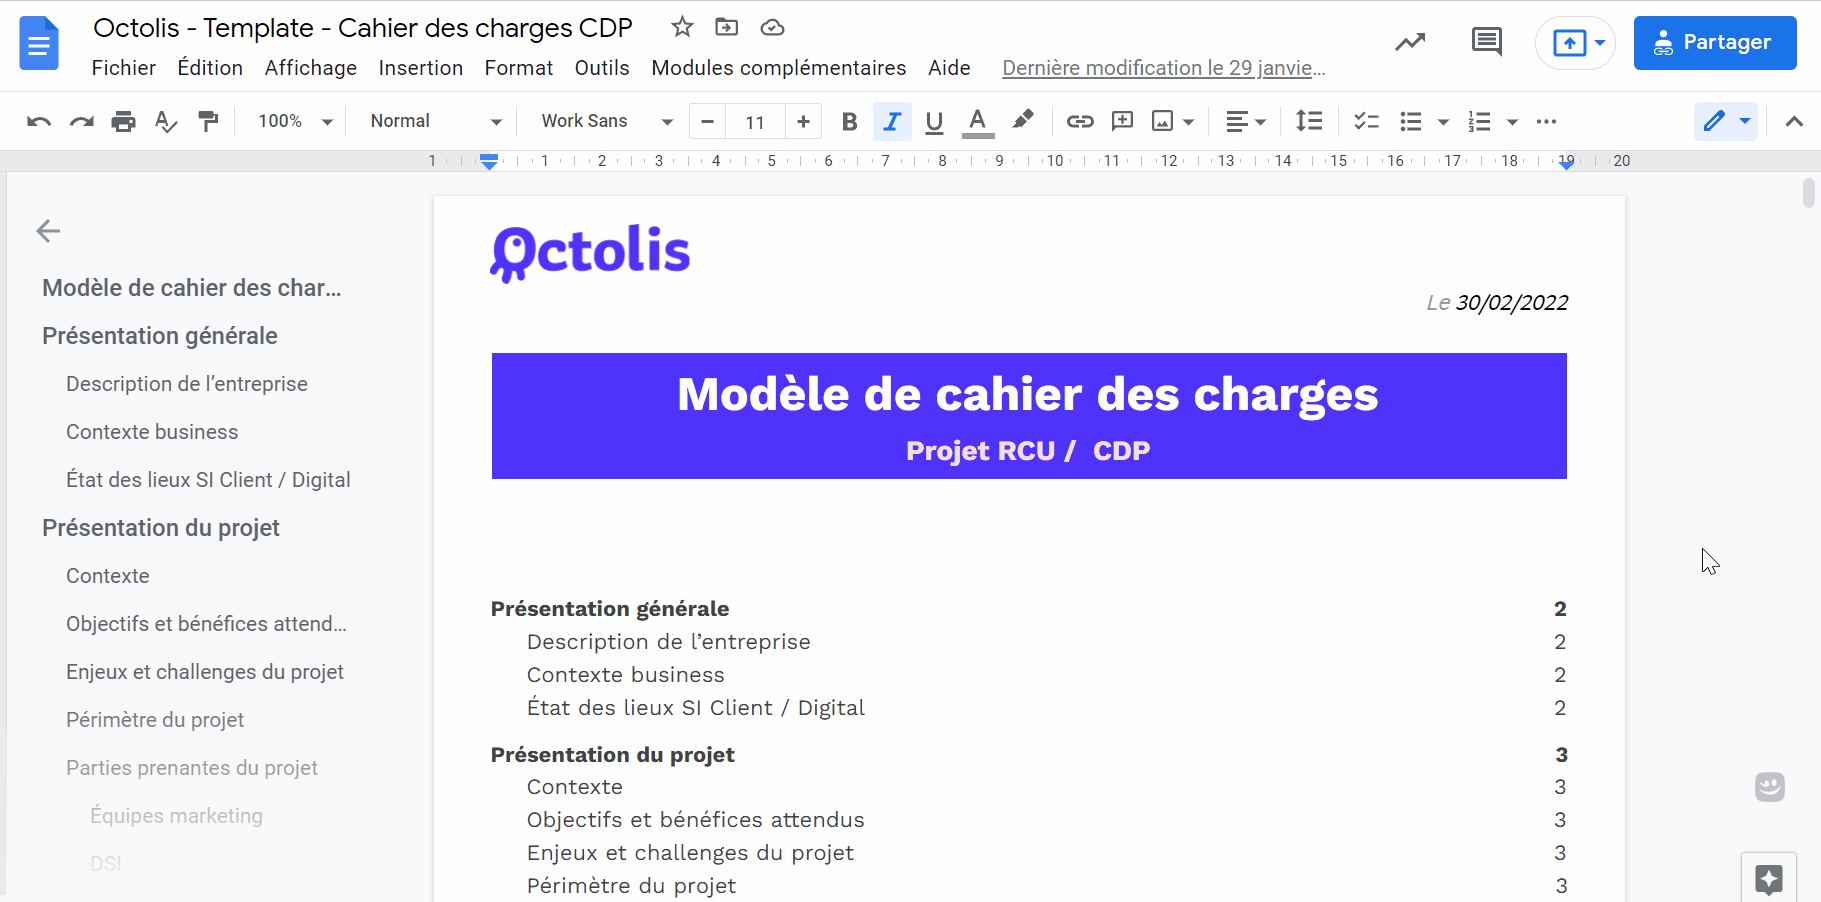 modele cahier des charges cdp